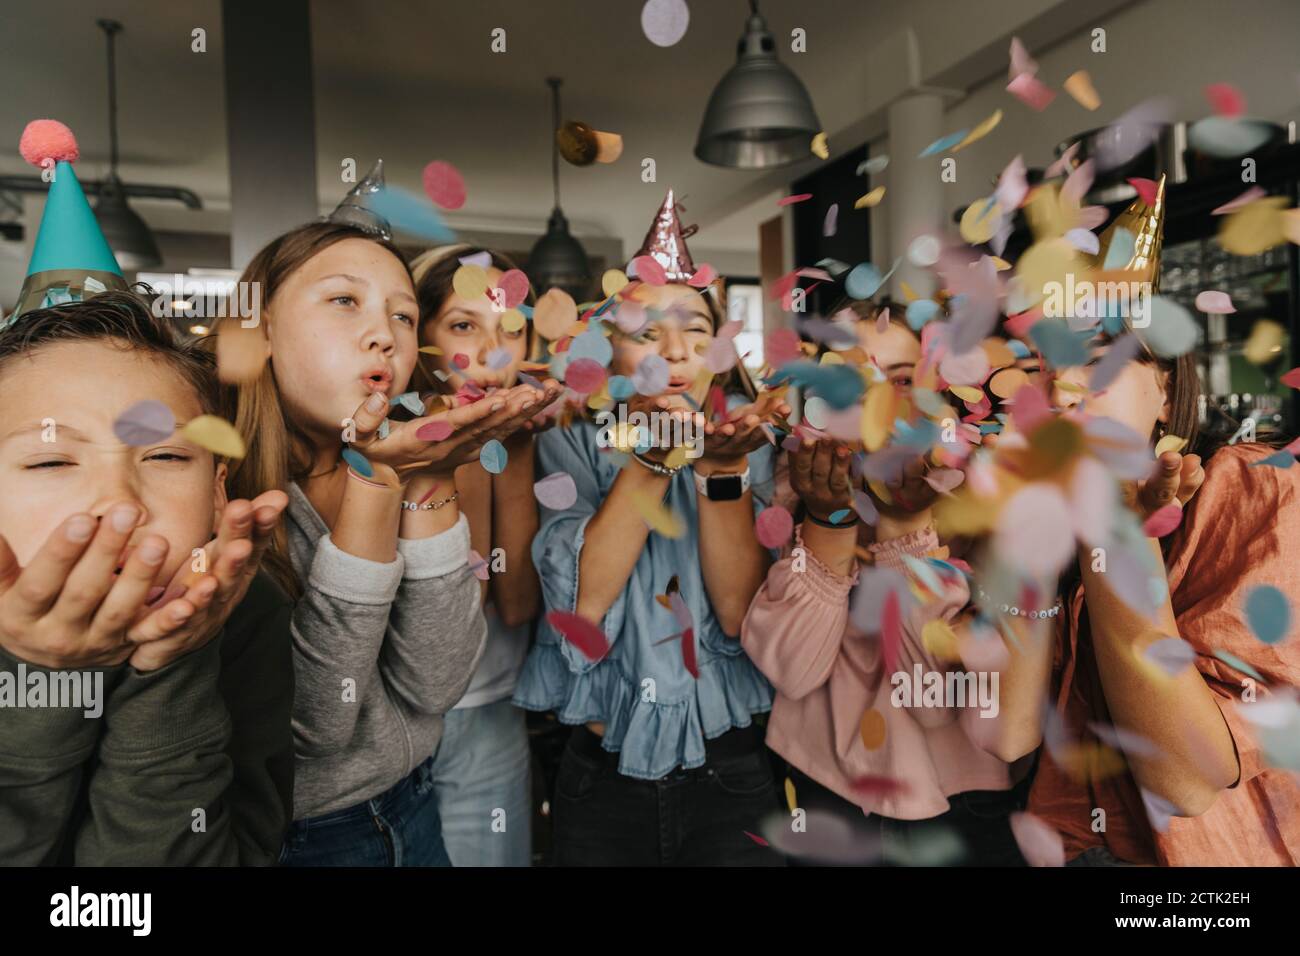 Playful friends blowing confetti while enjoying birthday party at home Stock Photo